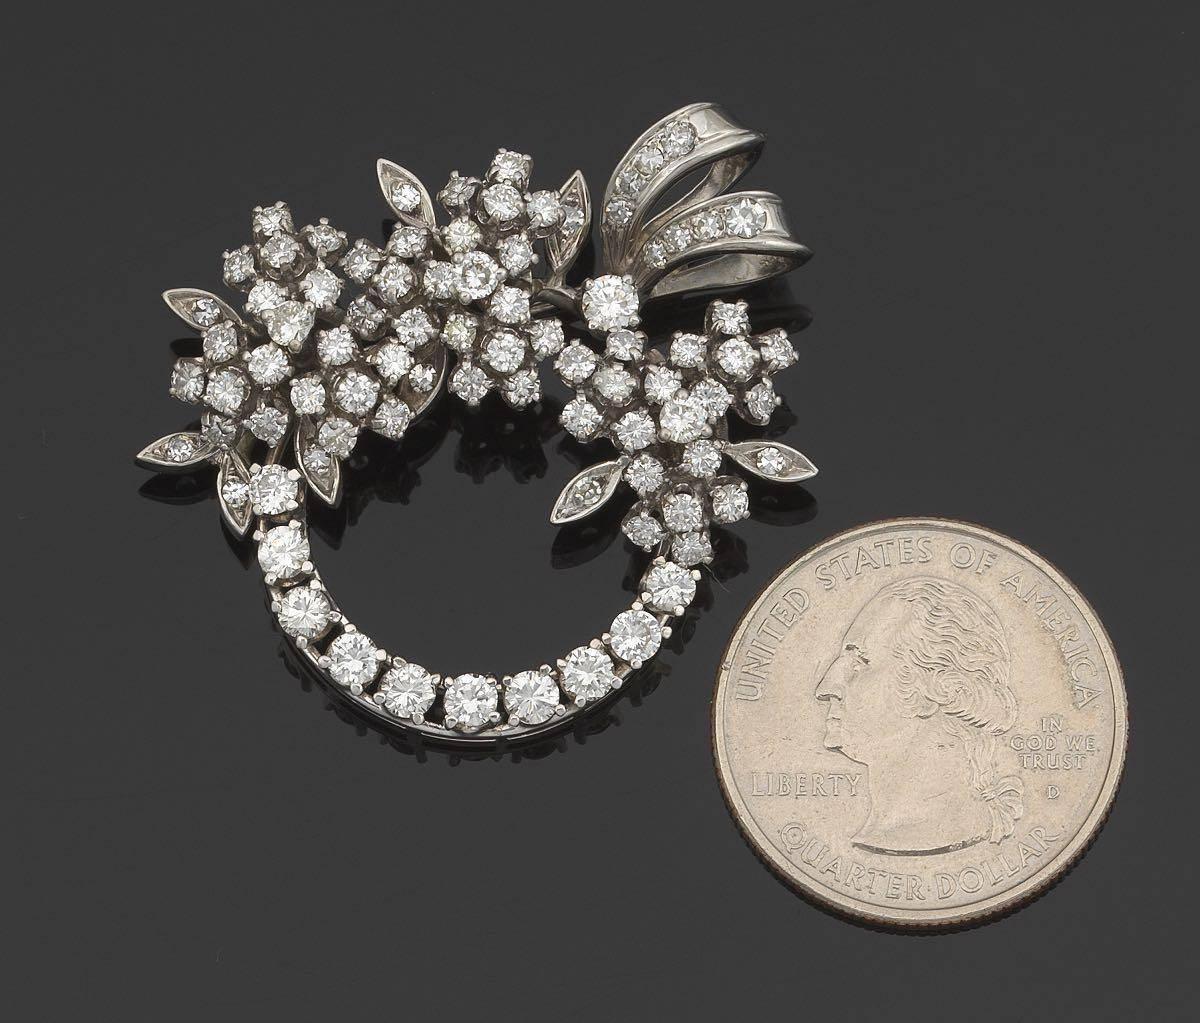 Impressive 1940's Art Deco 14 karat white gold wreath brooch / pin / pendant is a stunning example of a convertible brooch pendant.  

The piece features a dazzling array of 3.50 carats of sparkling round brilliant and single cut colorless VS/SI1